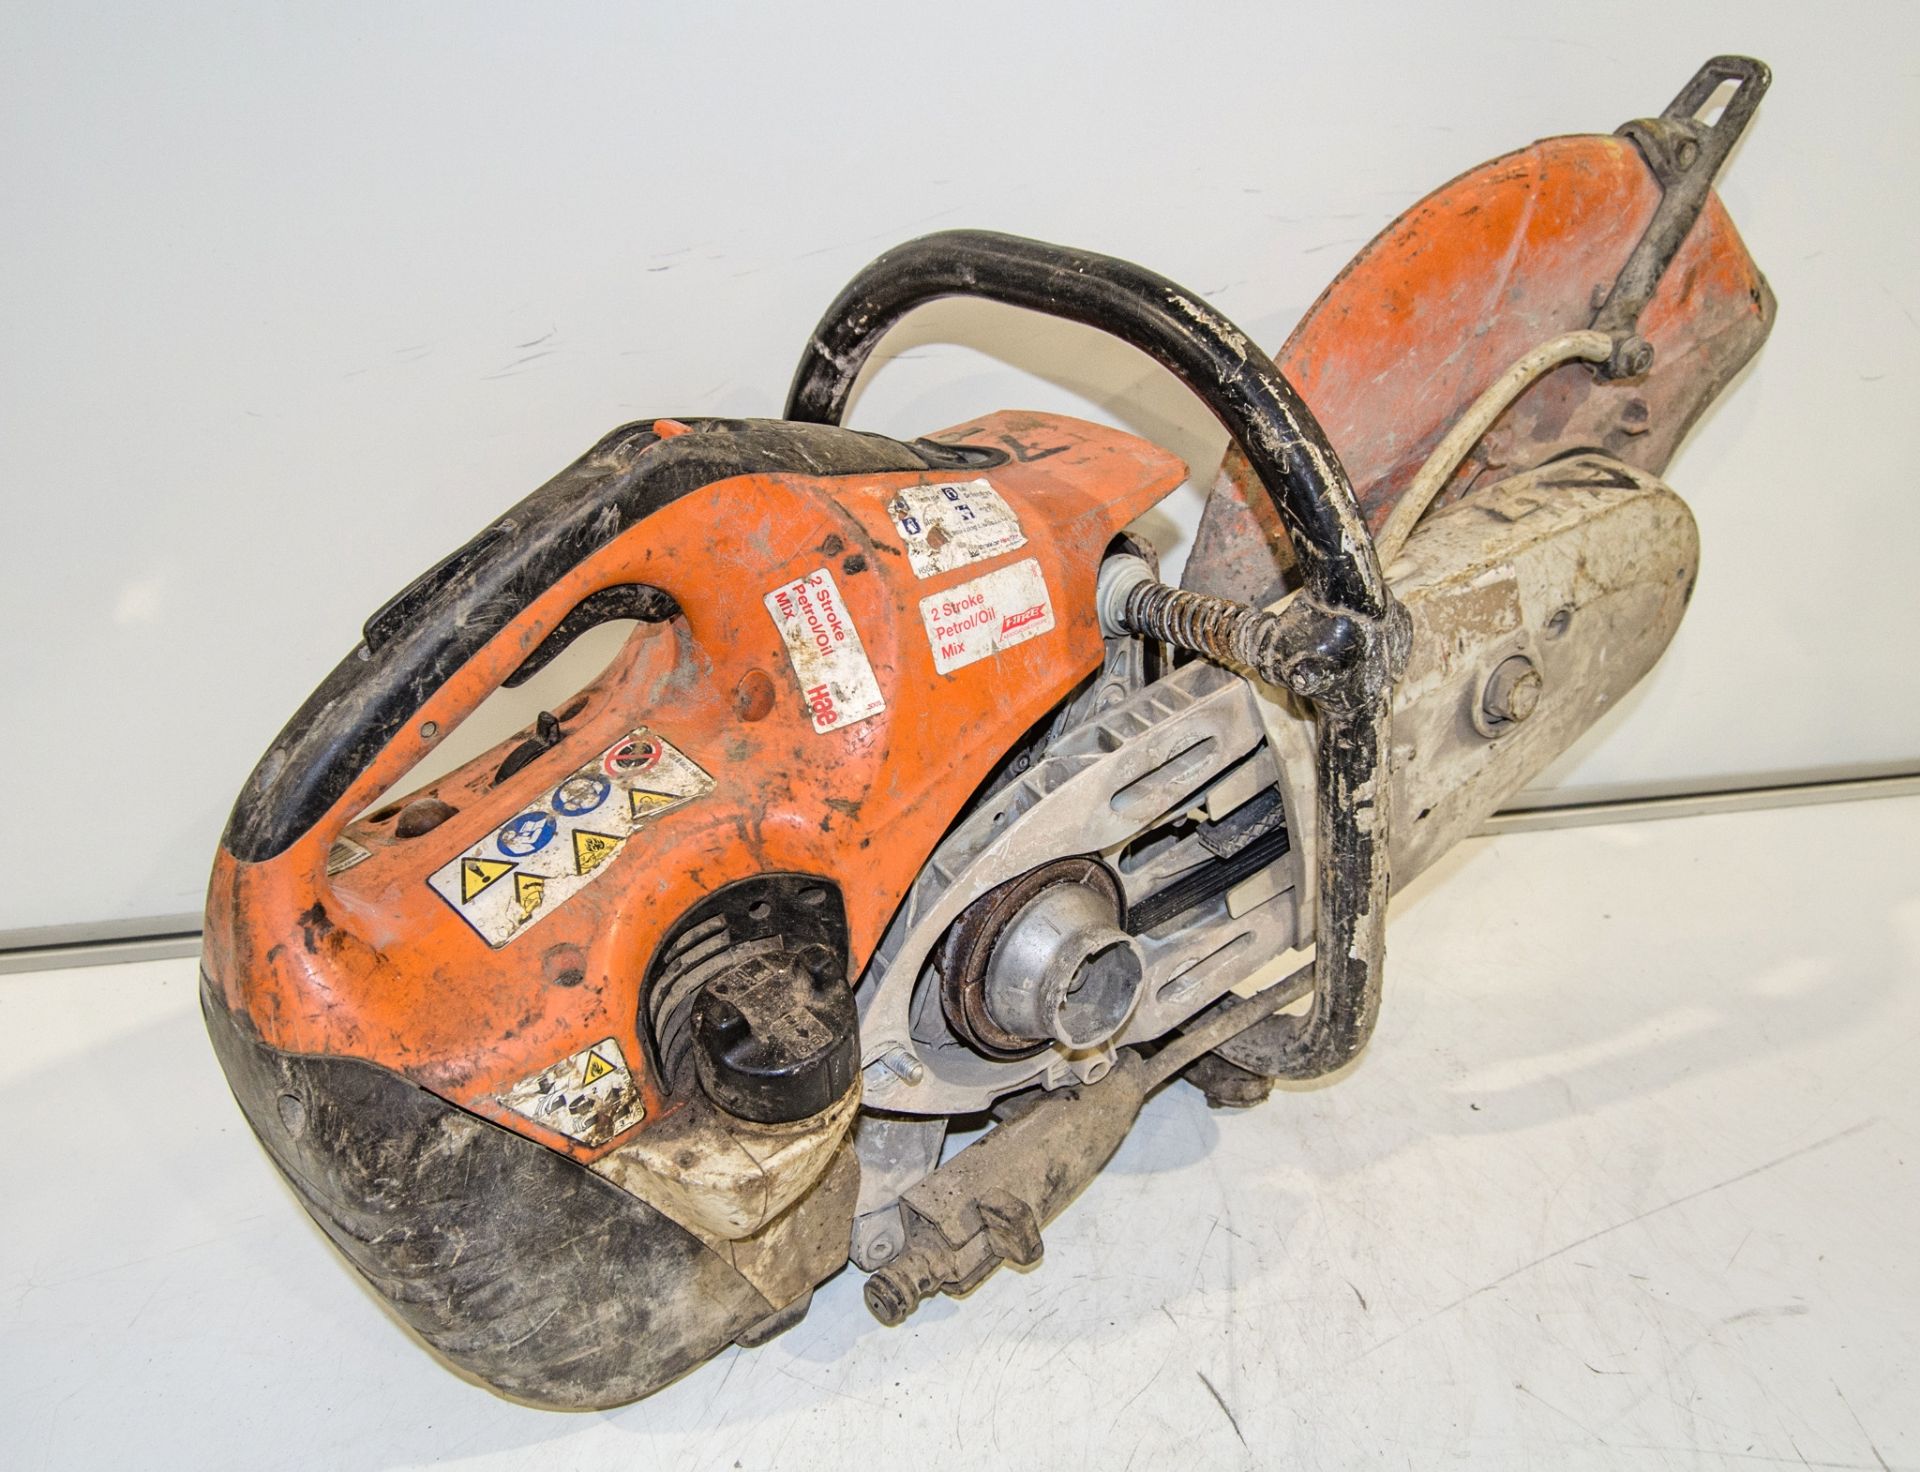 Stihl TS410 petrol driven cut off saw ** Pull cord assembly missing ** 18095513 - Image 2 of 2